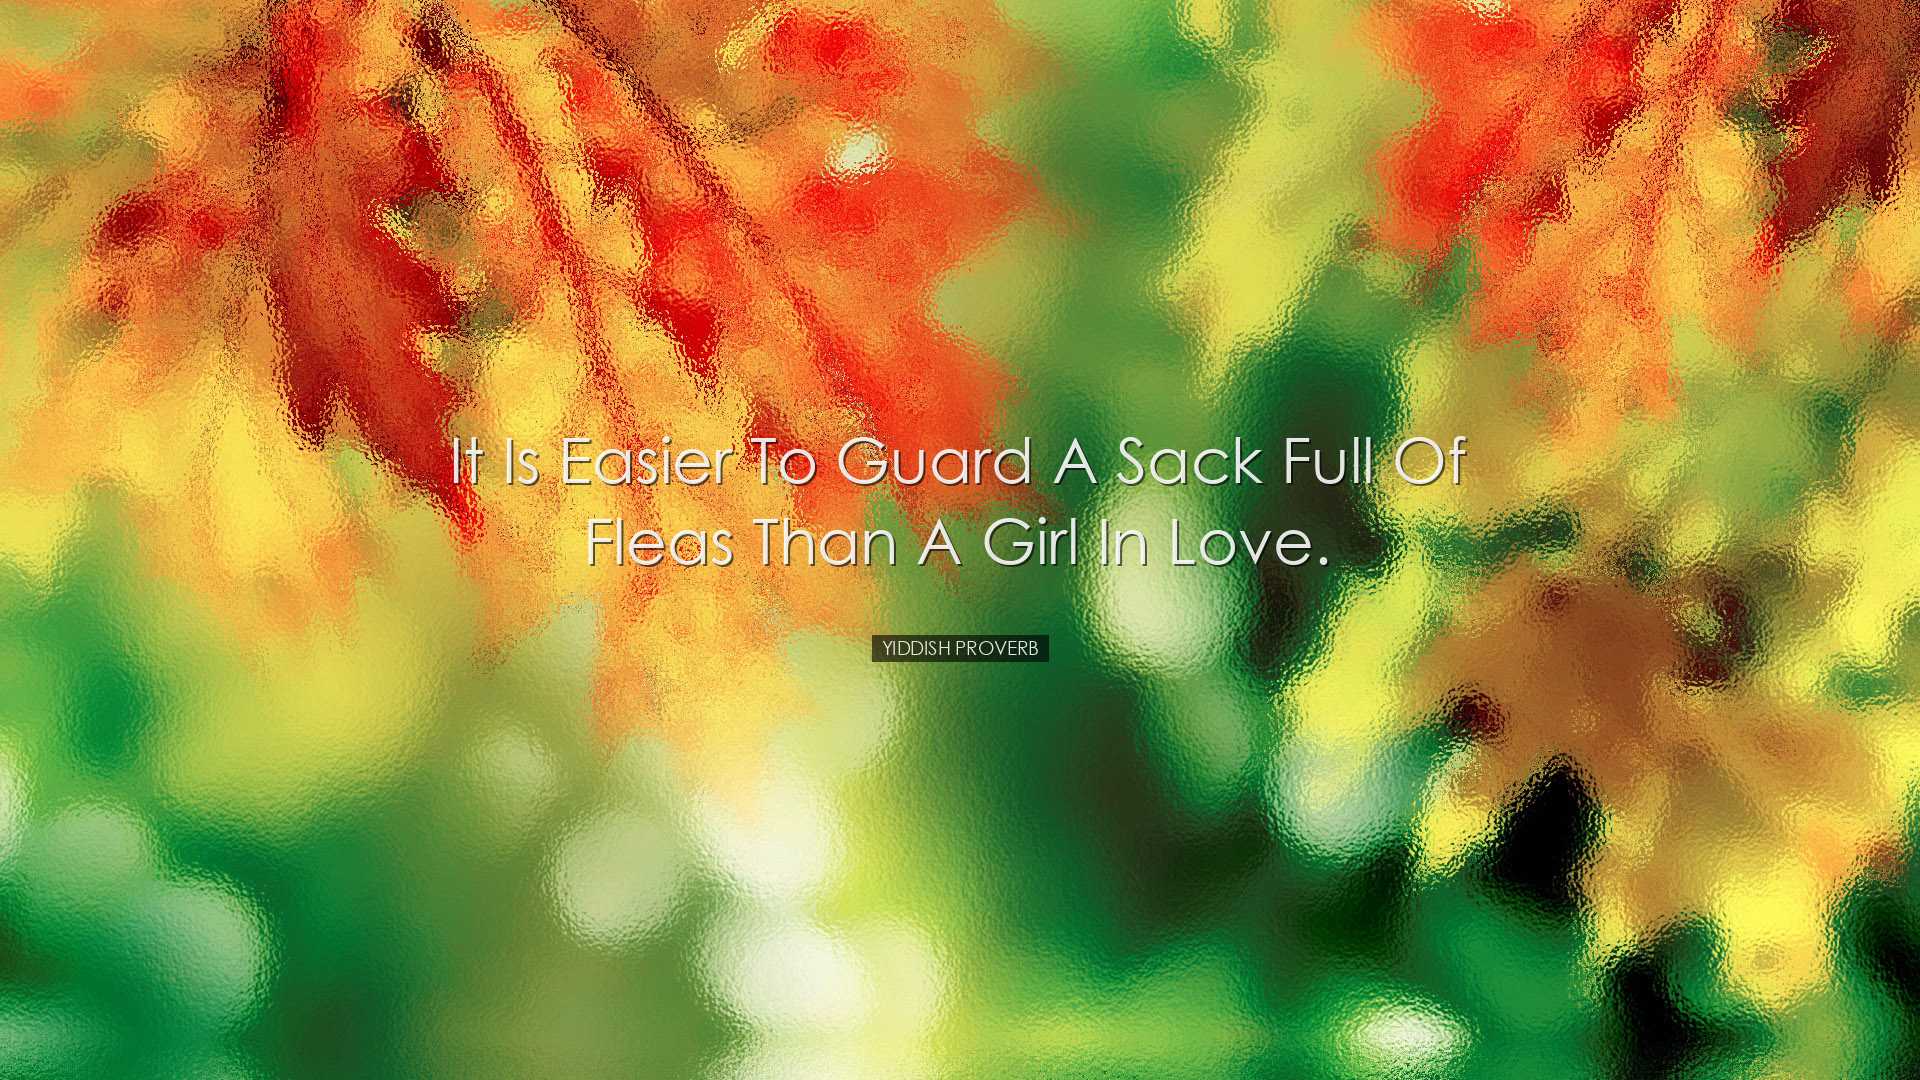 It is easier to guard a sack full of fleas than a girl in love. -